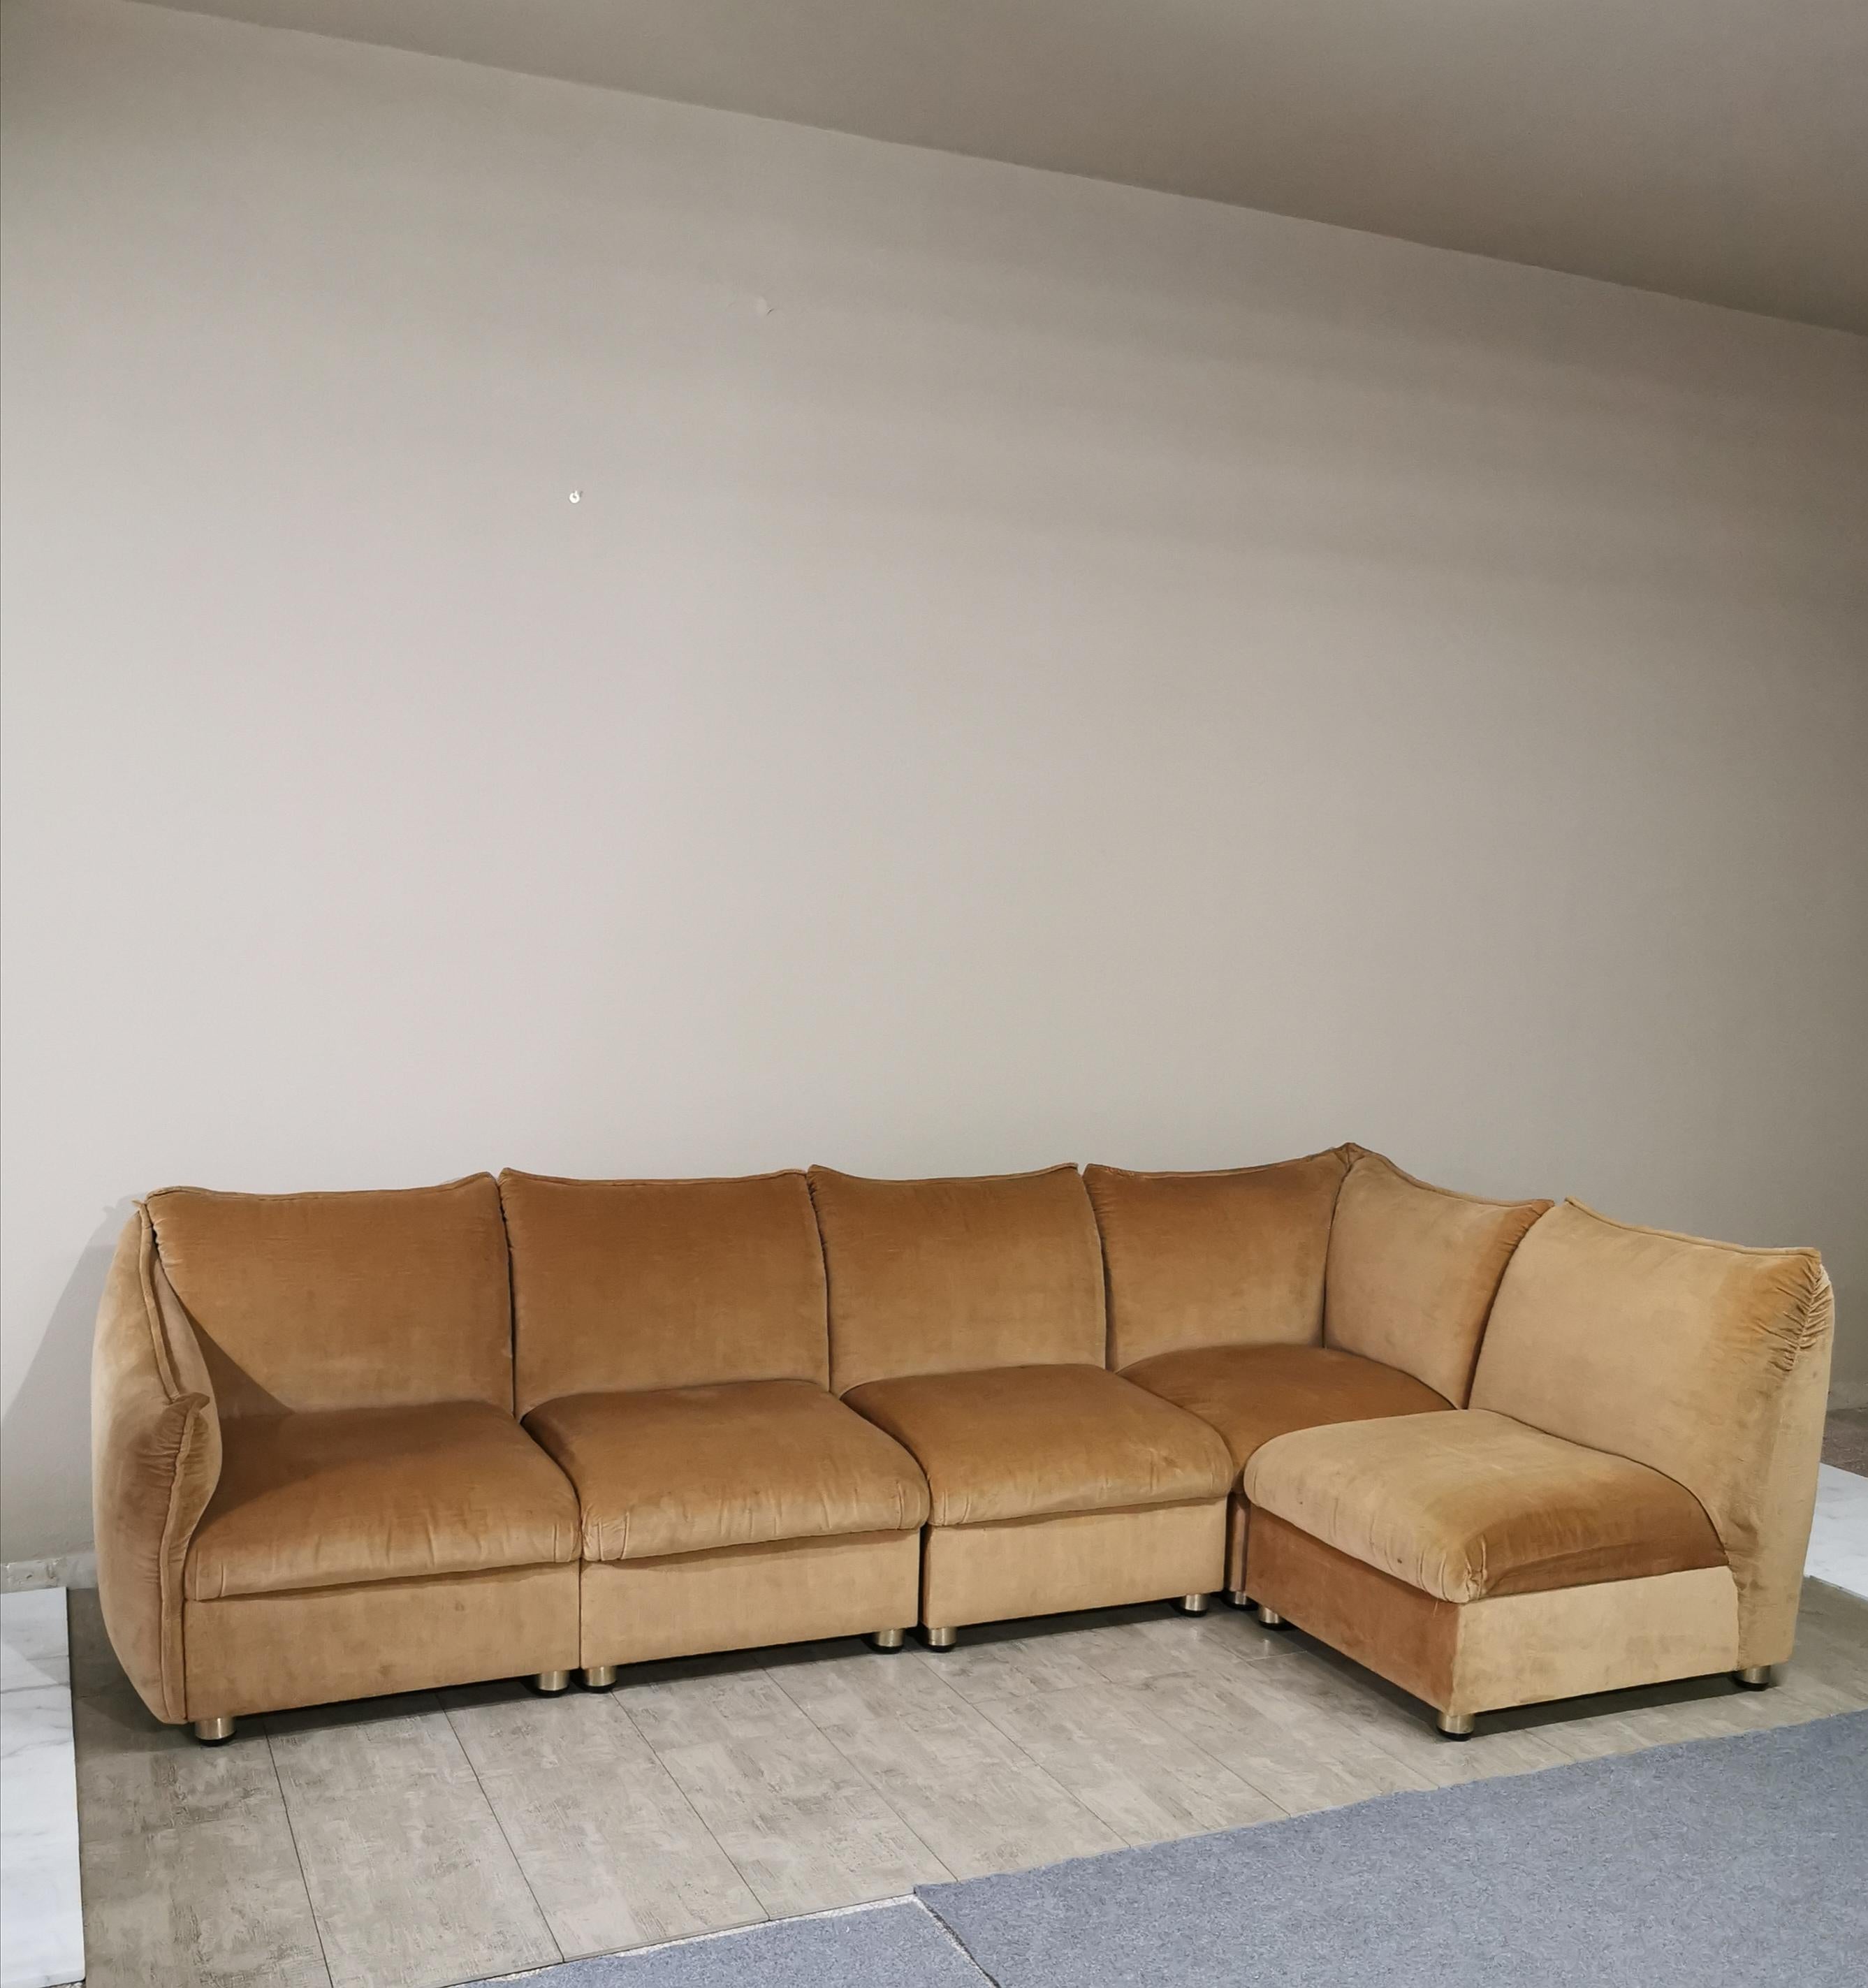 Set of 6 modular sofa with elegant lines and high design attributed to Cassina in smooth camel velvet with black and golden plastic feet. Italian production of the 1970s.

